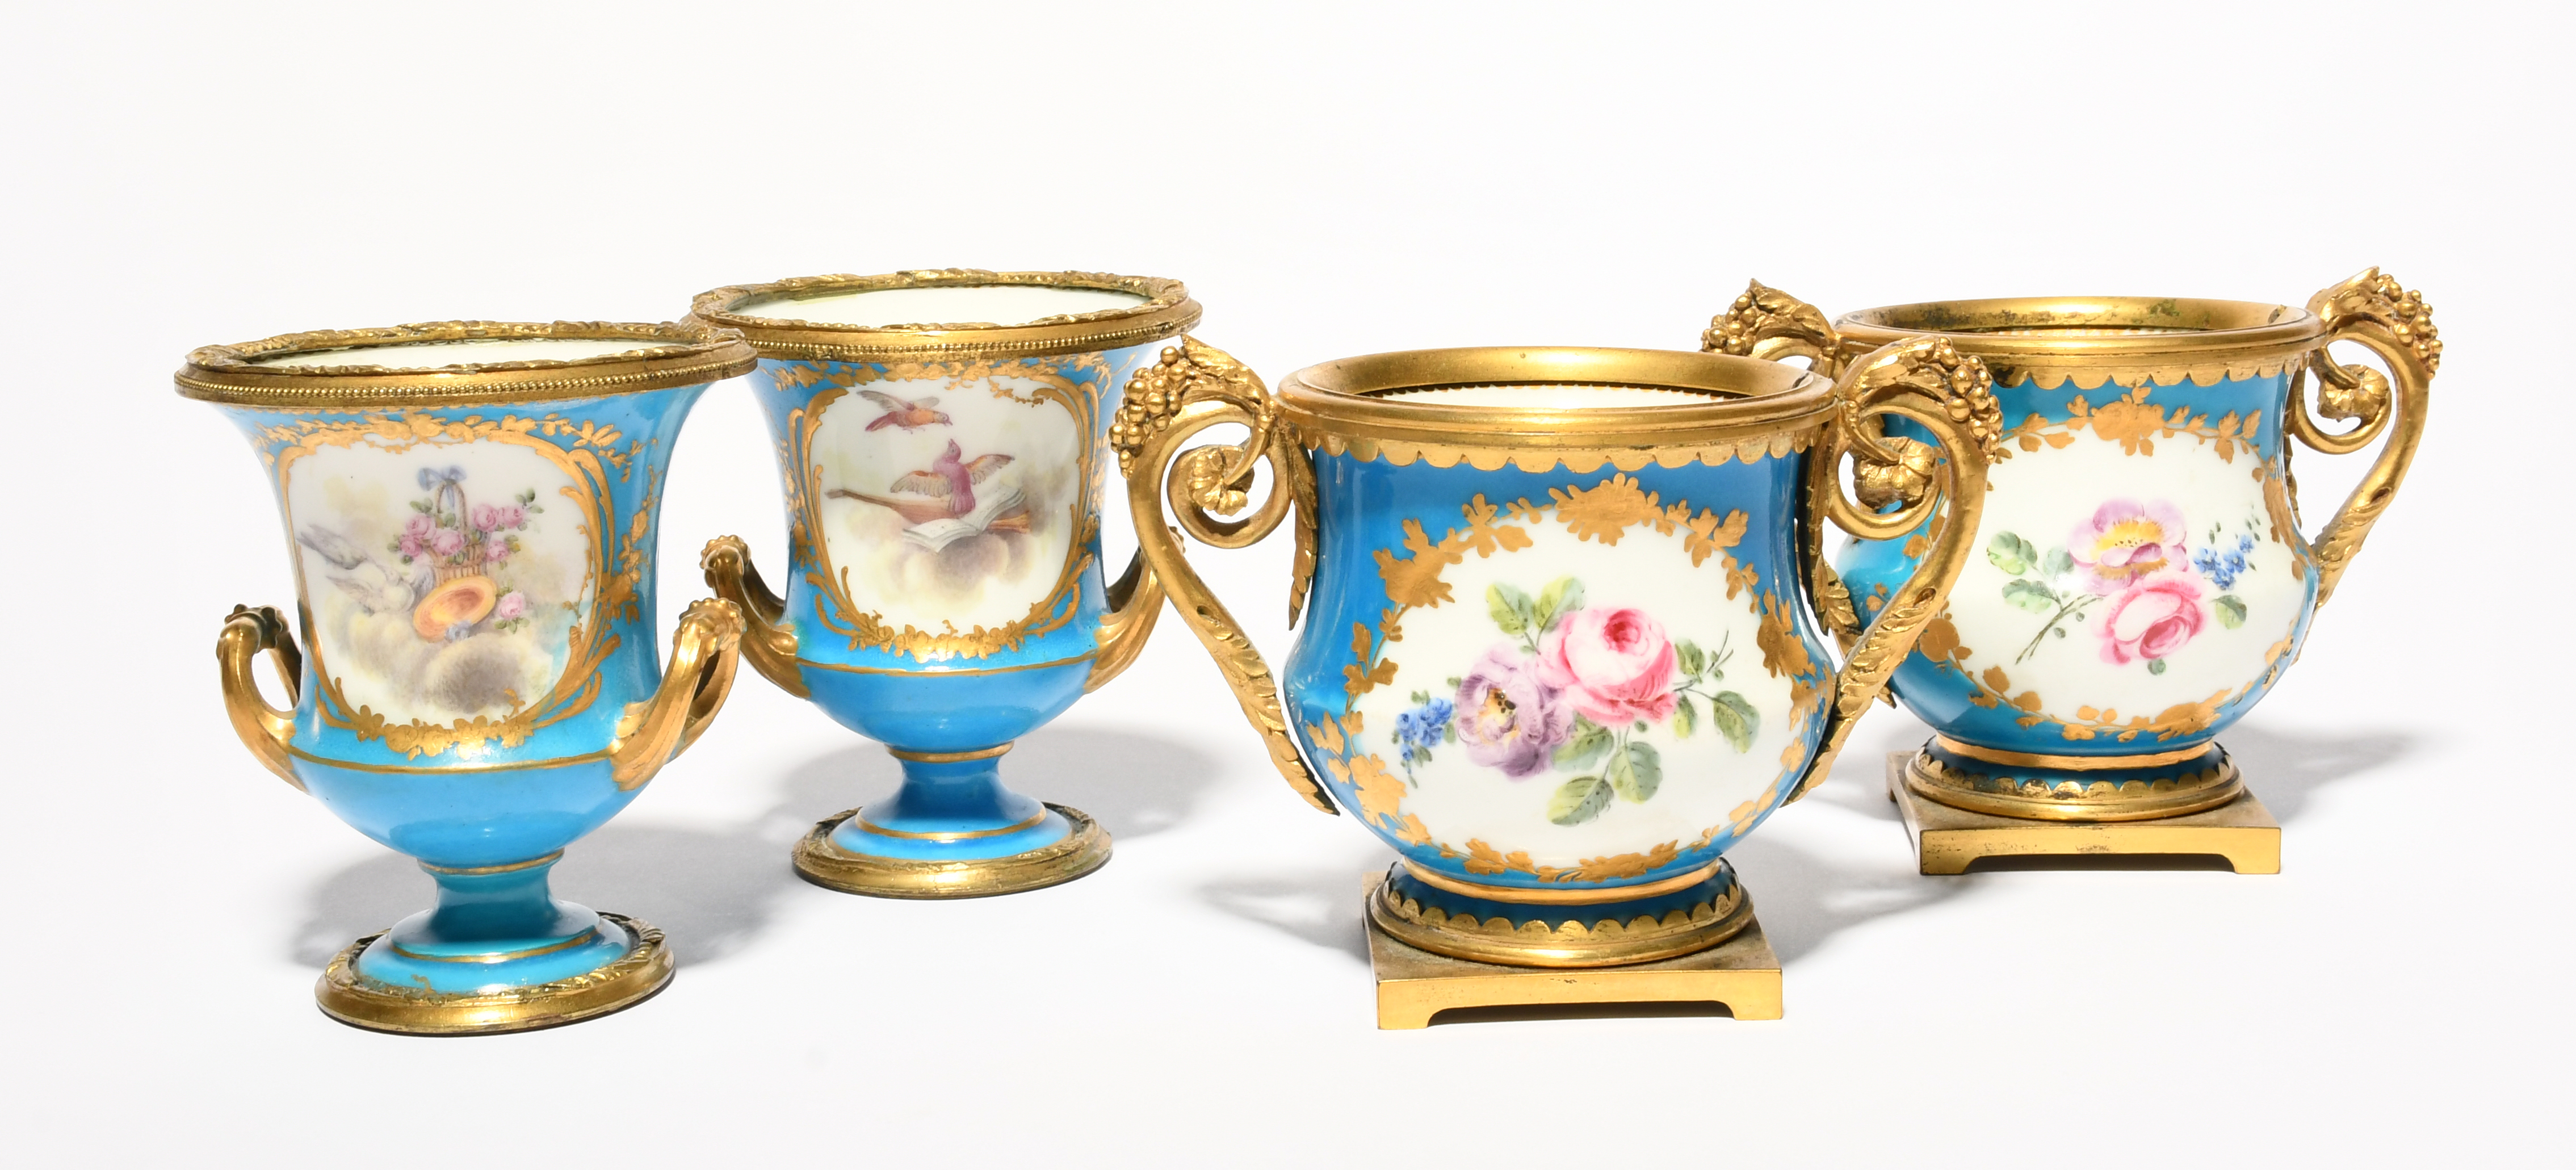 A pair of Sèvres ormolu-mounted small vases, 2nd half 18th century, painted with flower sprays - Image 3 of 3